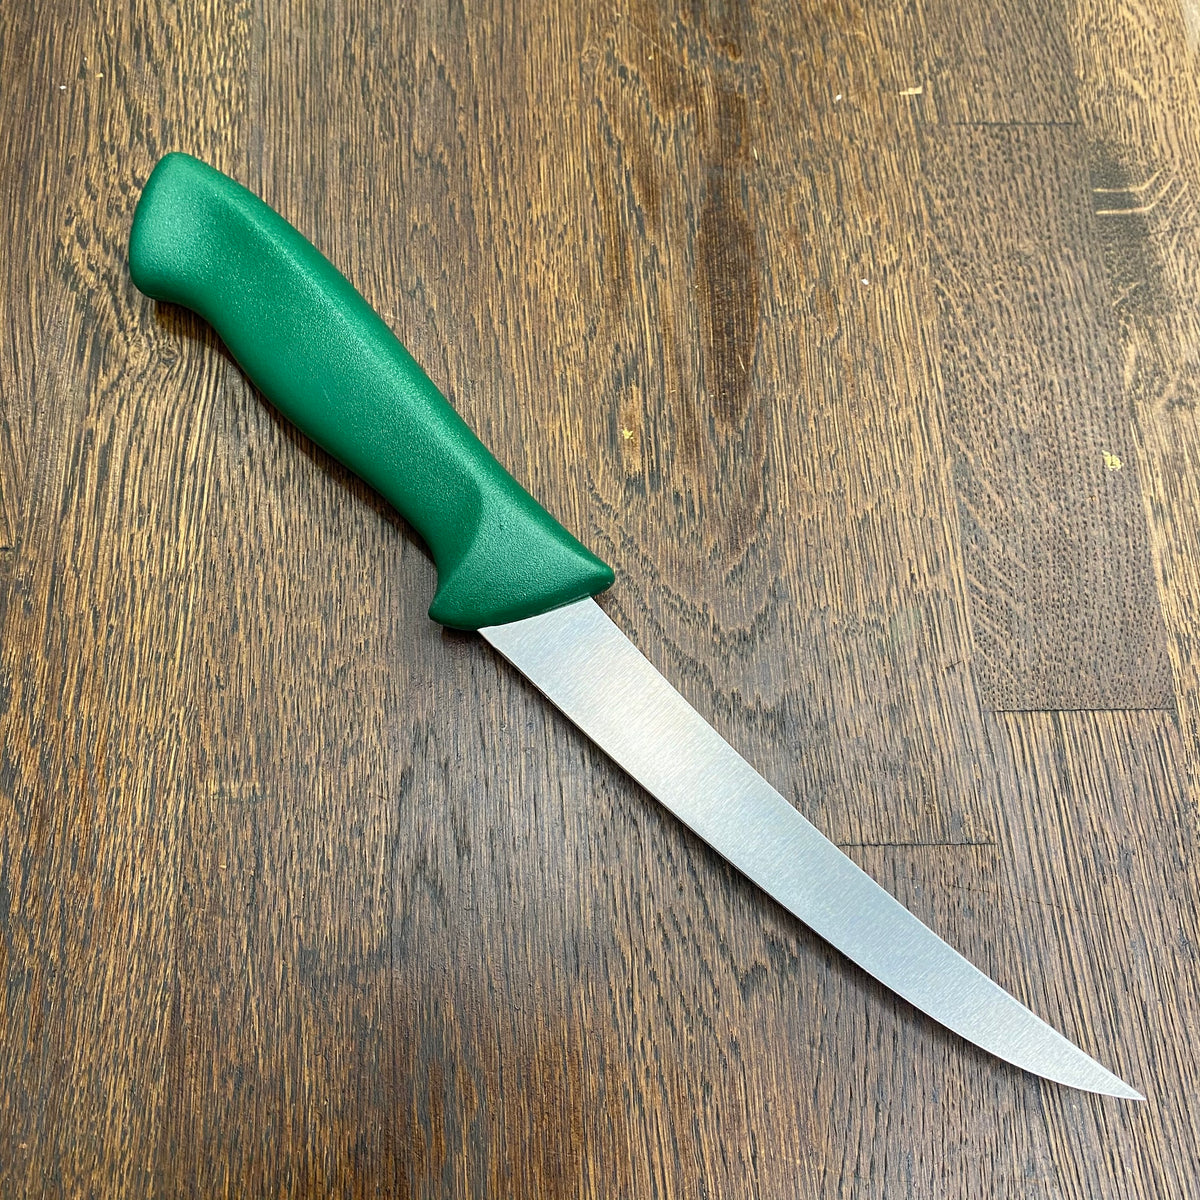 Friedr Herder Don Carlos 6" Boning Knife Curved Semi Flex Stainless Green